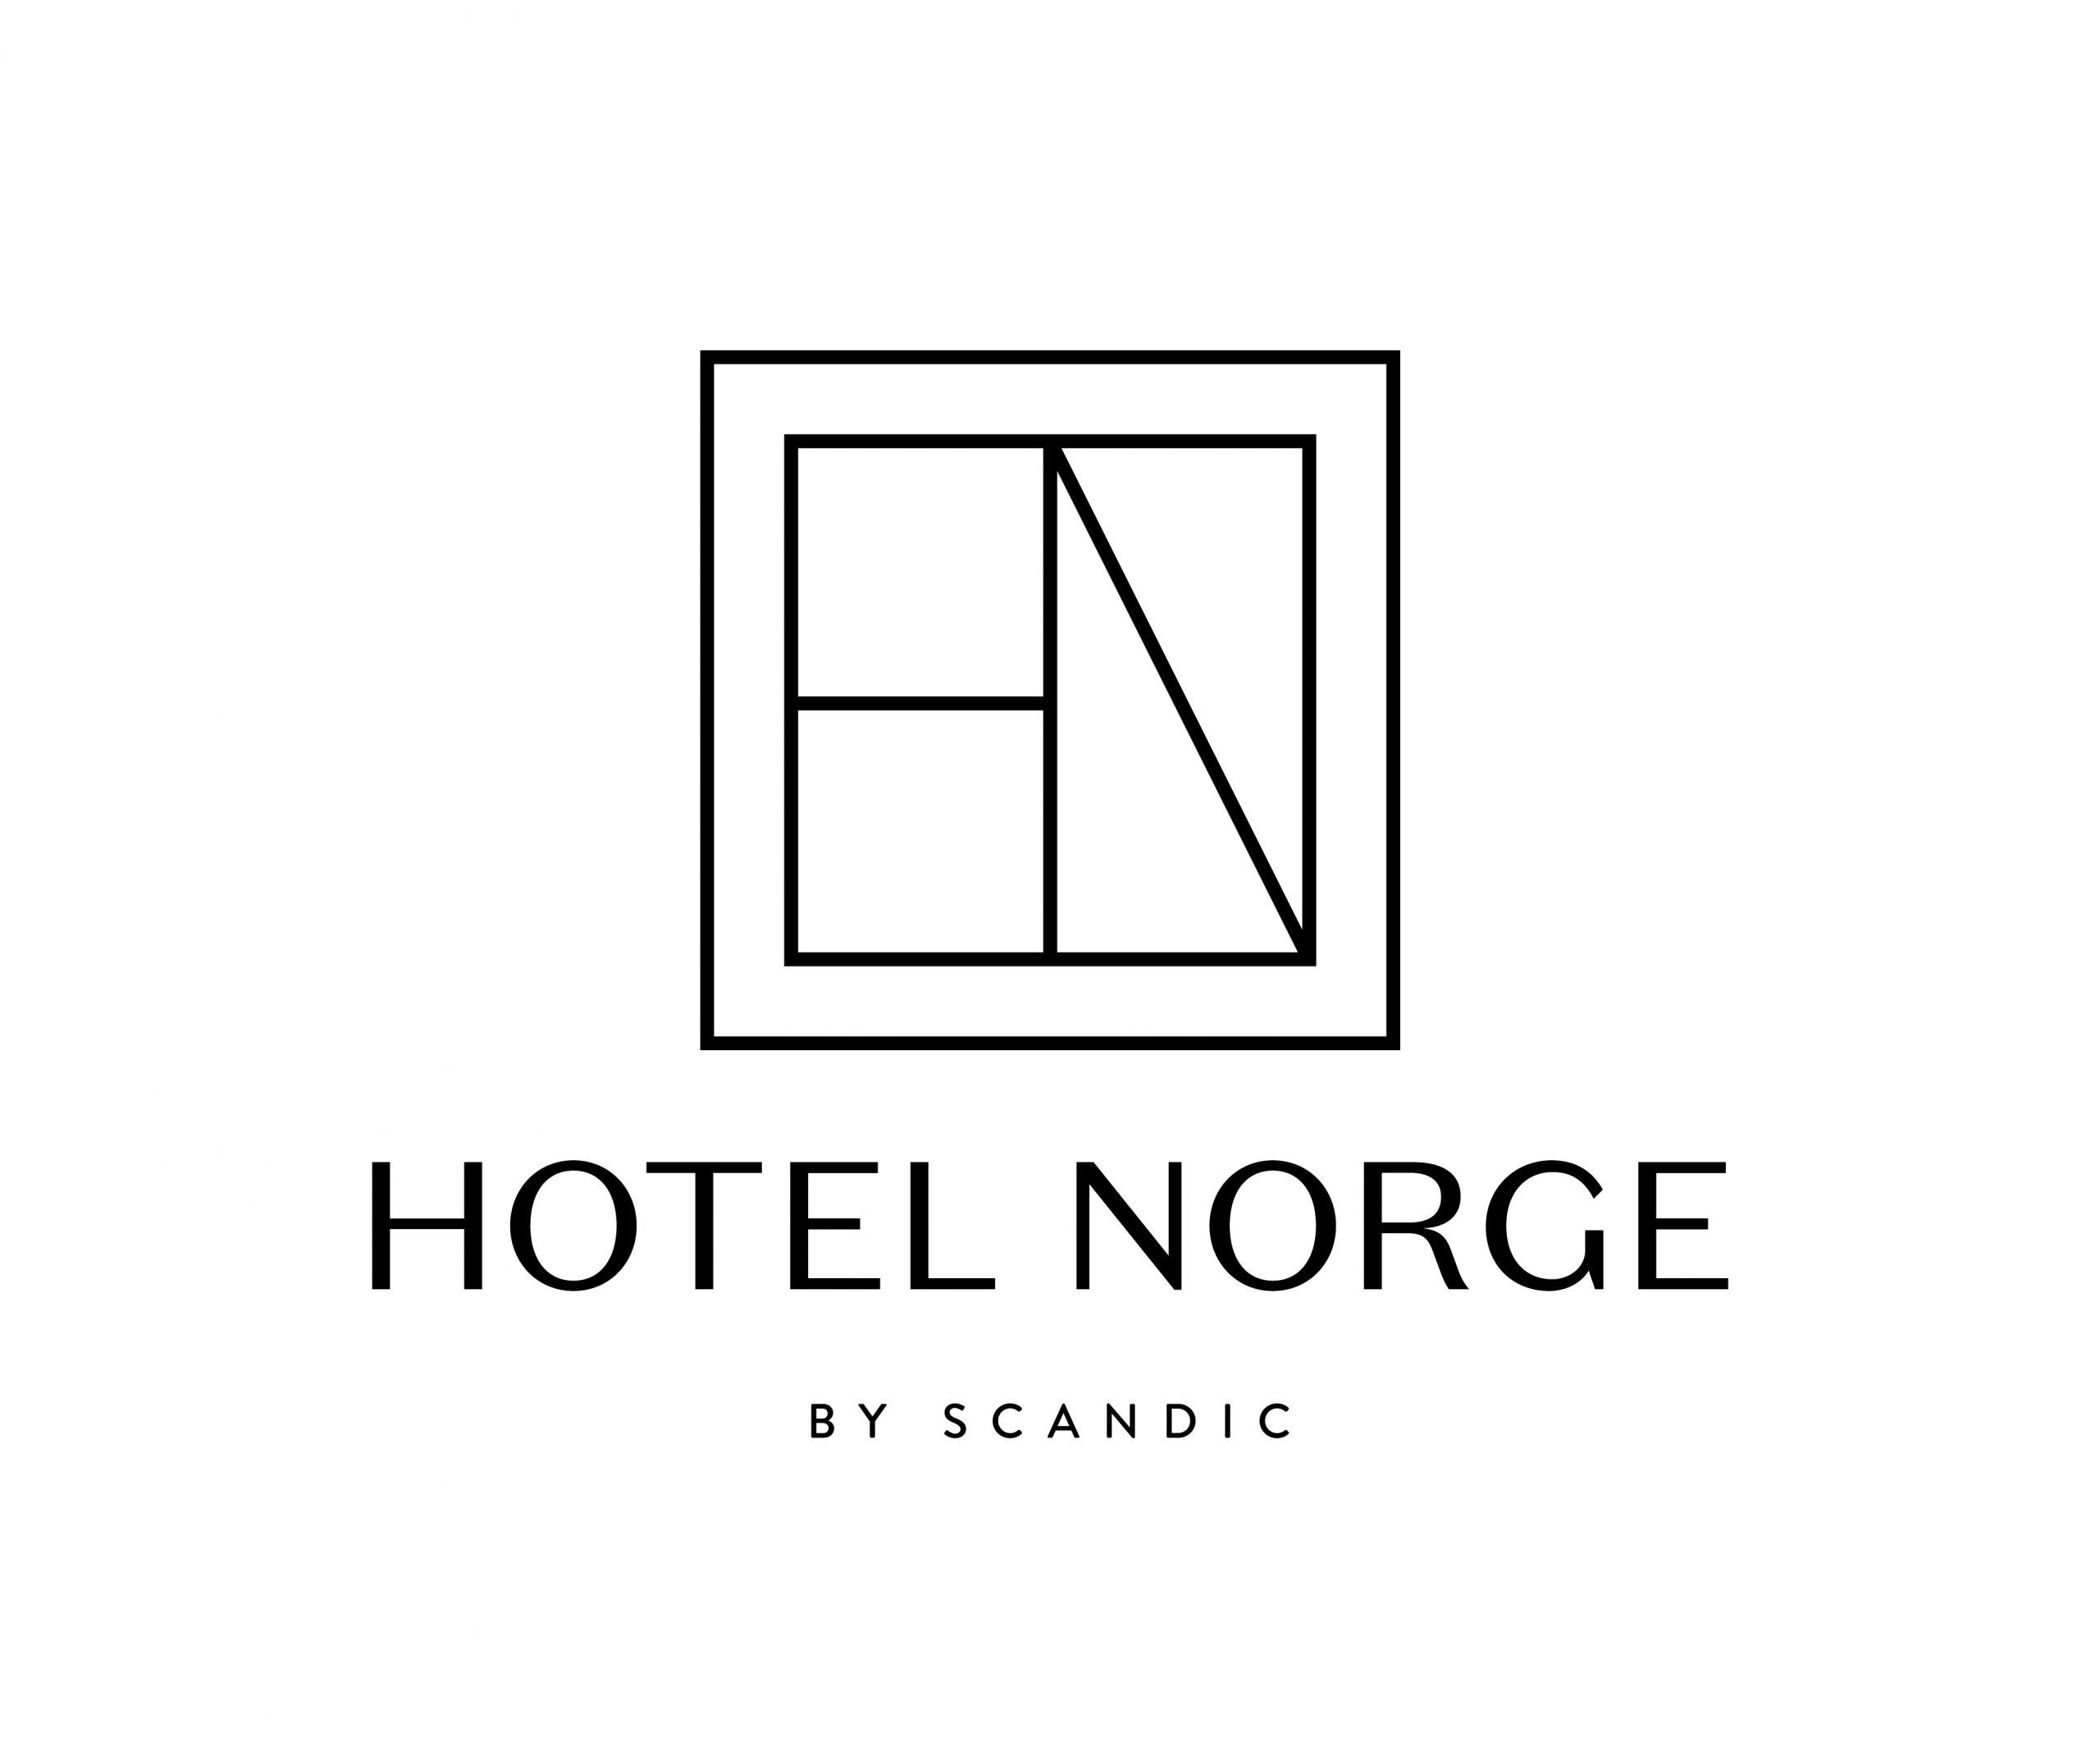 Start your day with Hotell Norge.